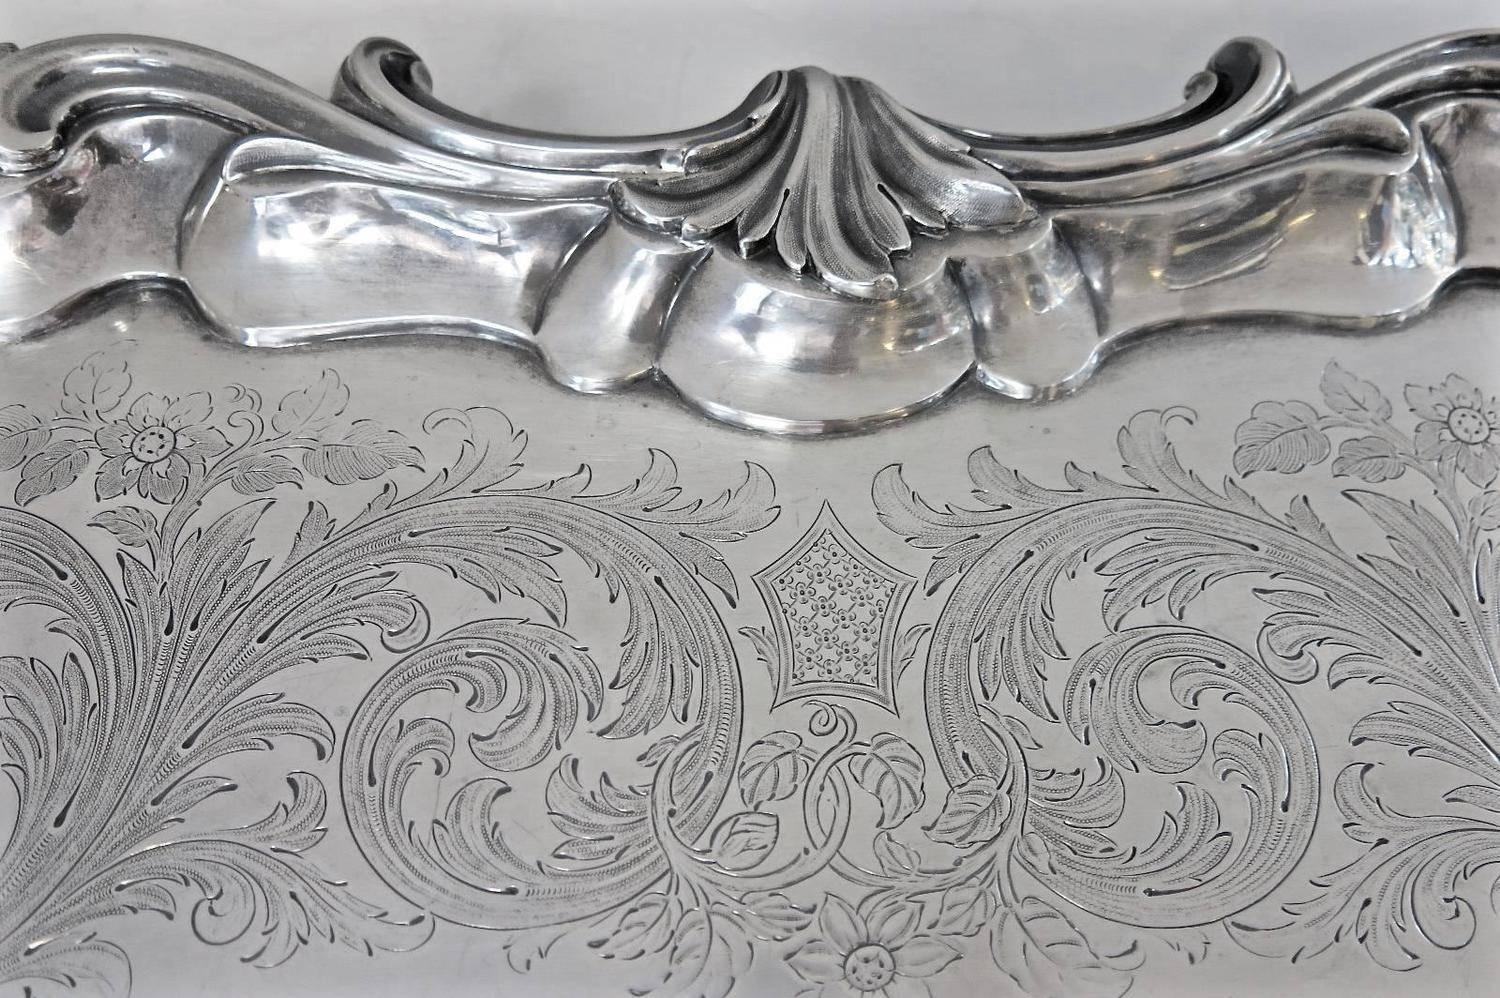 Victorian Antique English Sterling Silver Tray Dated 1842 by Emes & Barnard